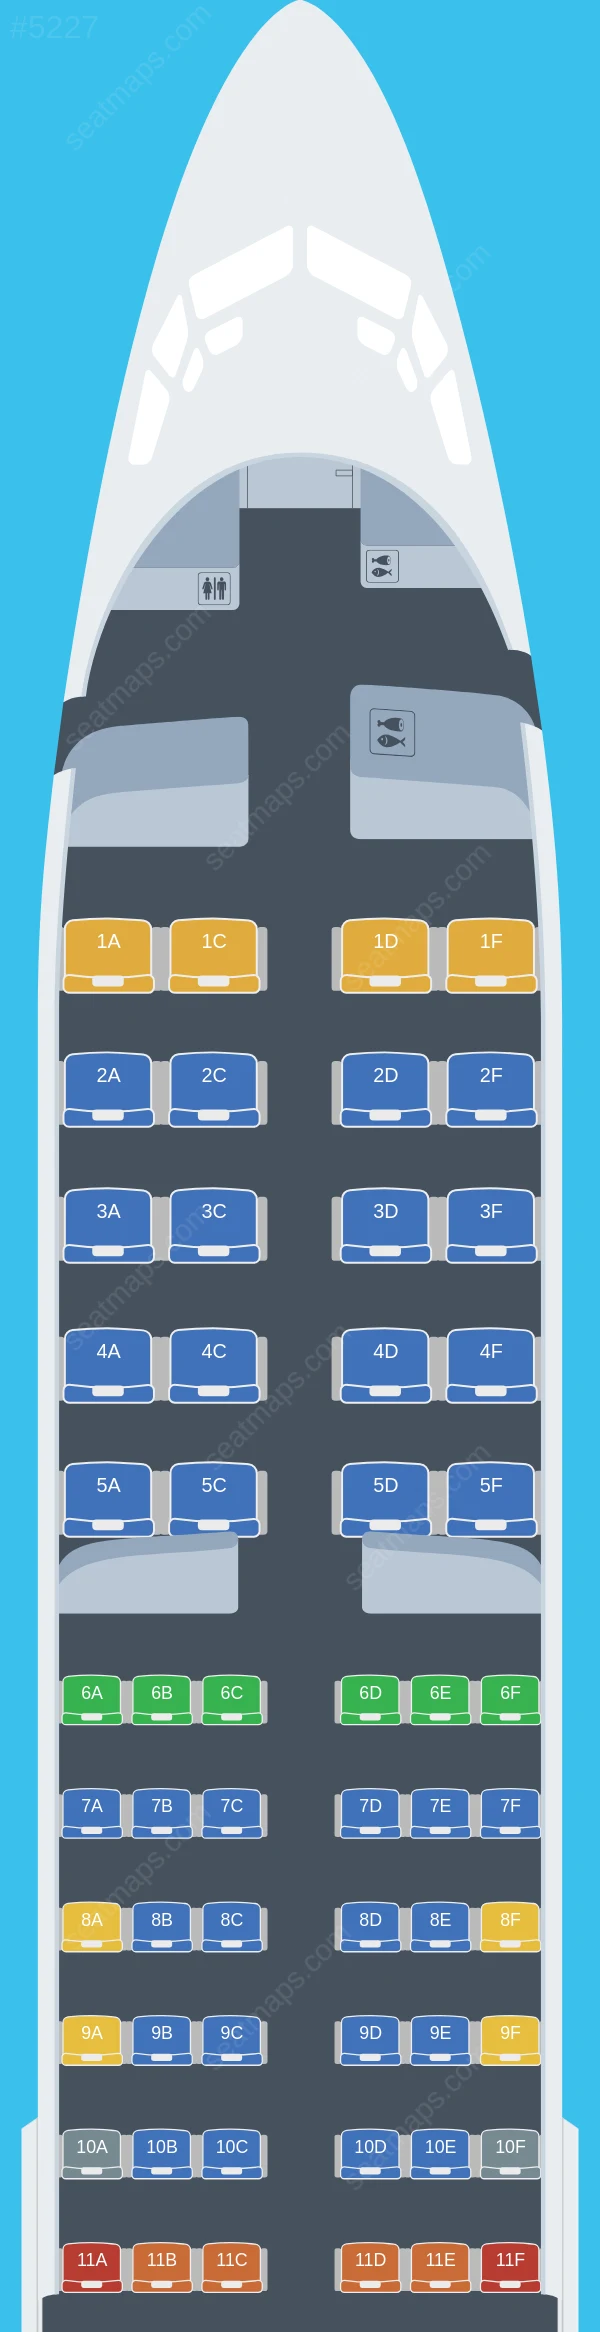 Tassili Airlines Boeing 737-800 seatmap preview